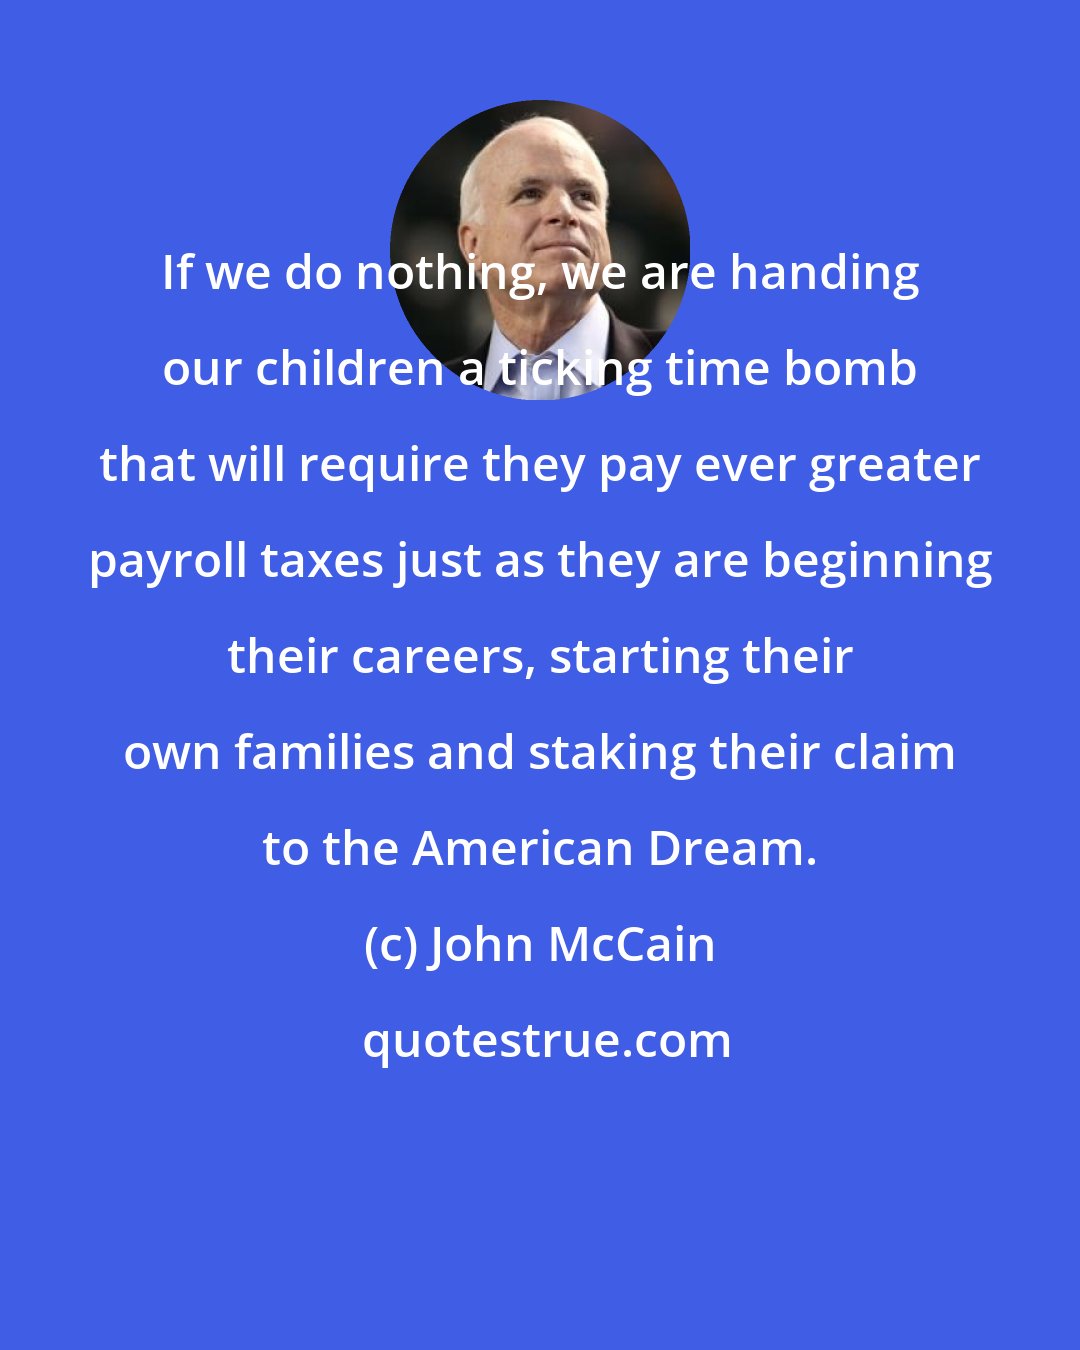 John McCain: If we do nothing, we are handing our children a ticking time bomb that will require they pay ever greater payroll taxes just as they are beginning their careers, starting their own families and staking their claim to the American Dream.